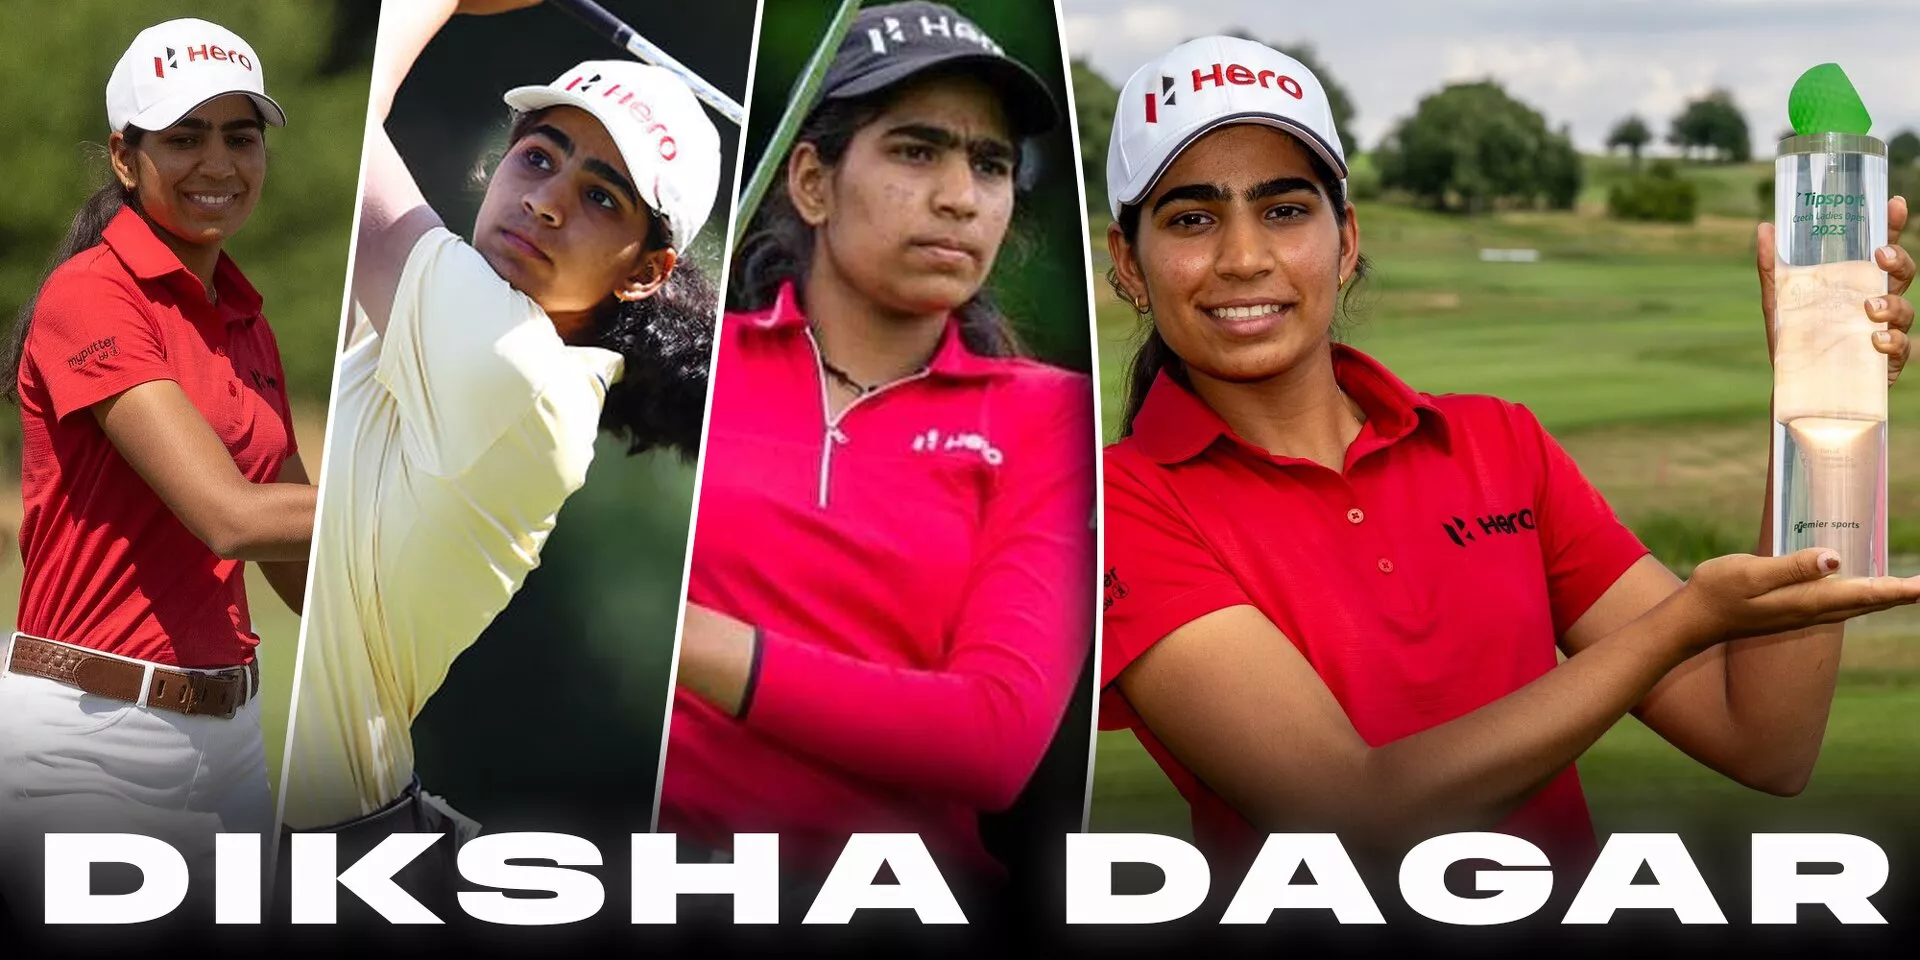 Five interesting facts to know about Diksha Dagar